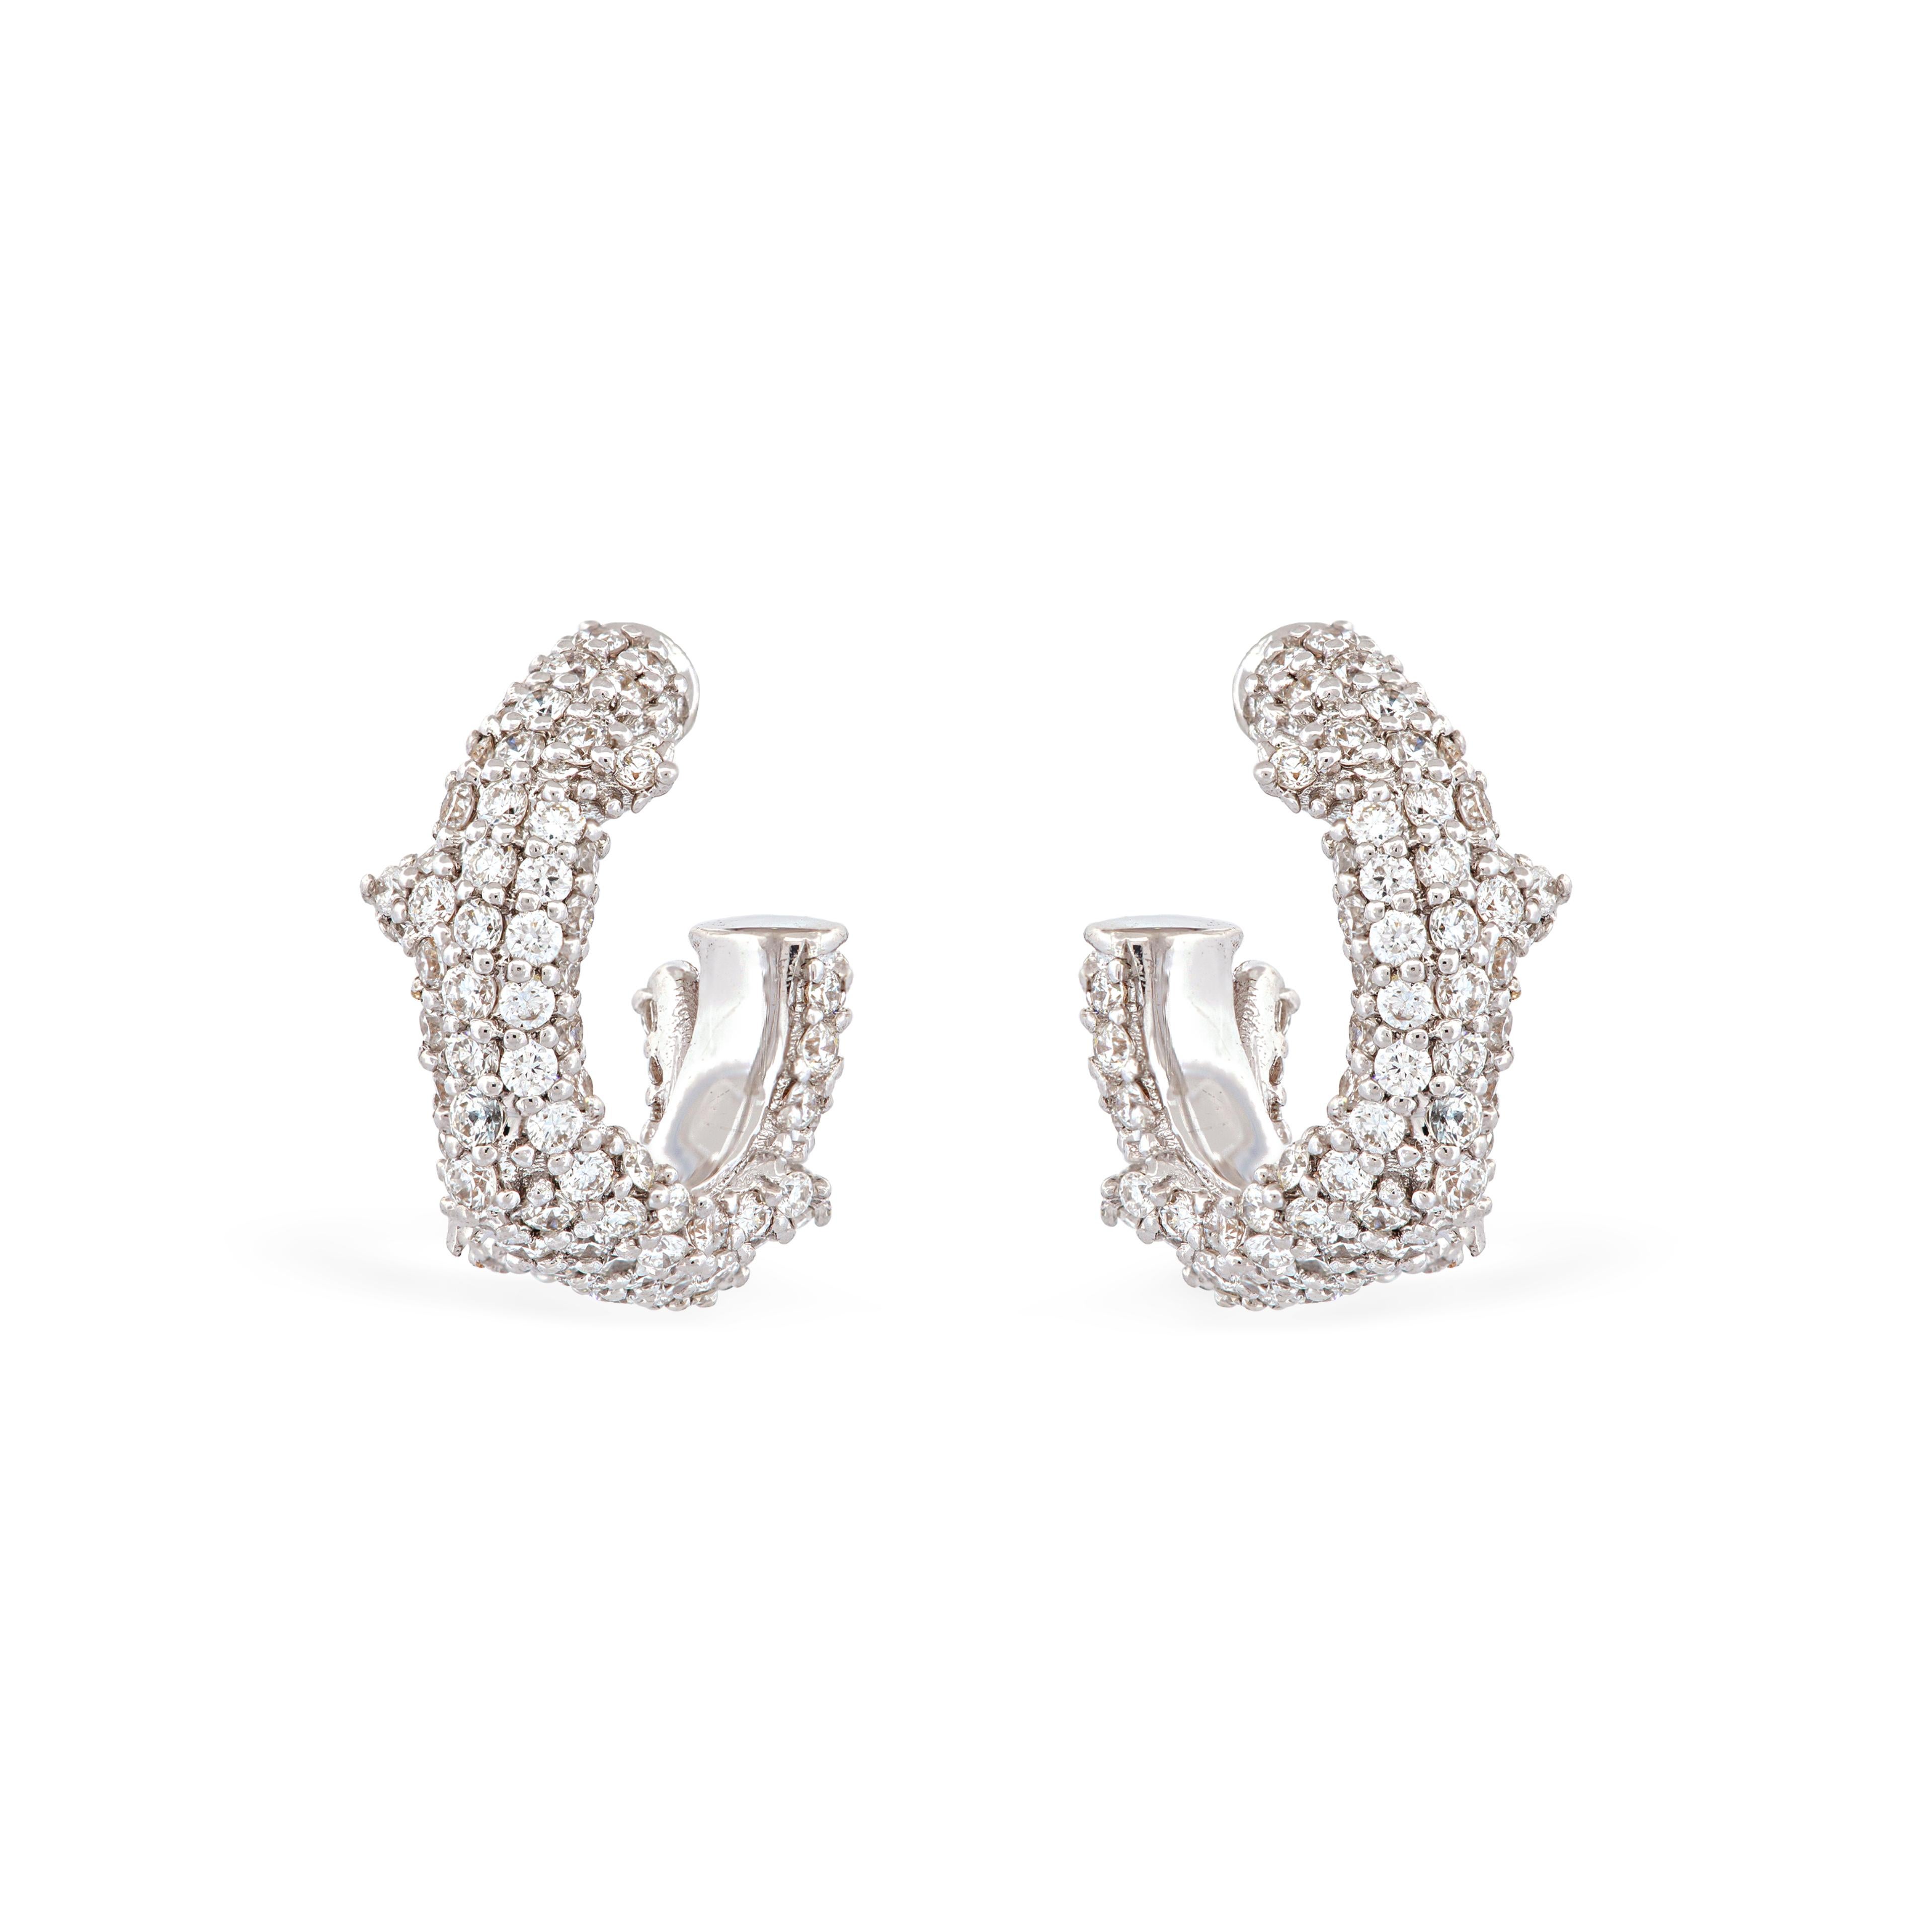 Our Pave Flora Spina Nano Earrings feature 192 VS-quality white diamonds, totaling 0.64 ttcw for the pair. 

Available as single or pair.